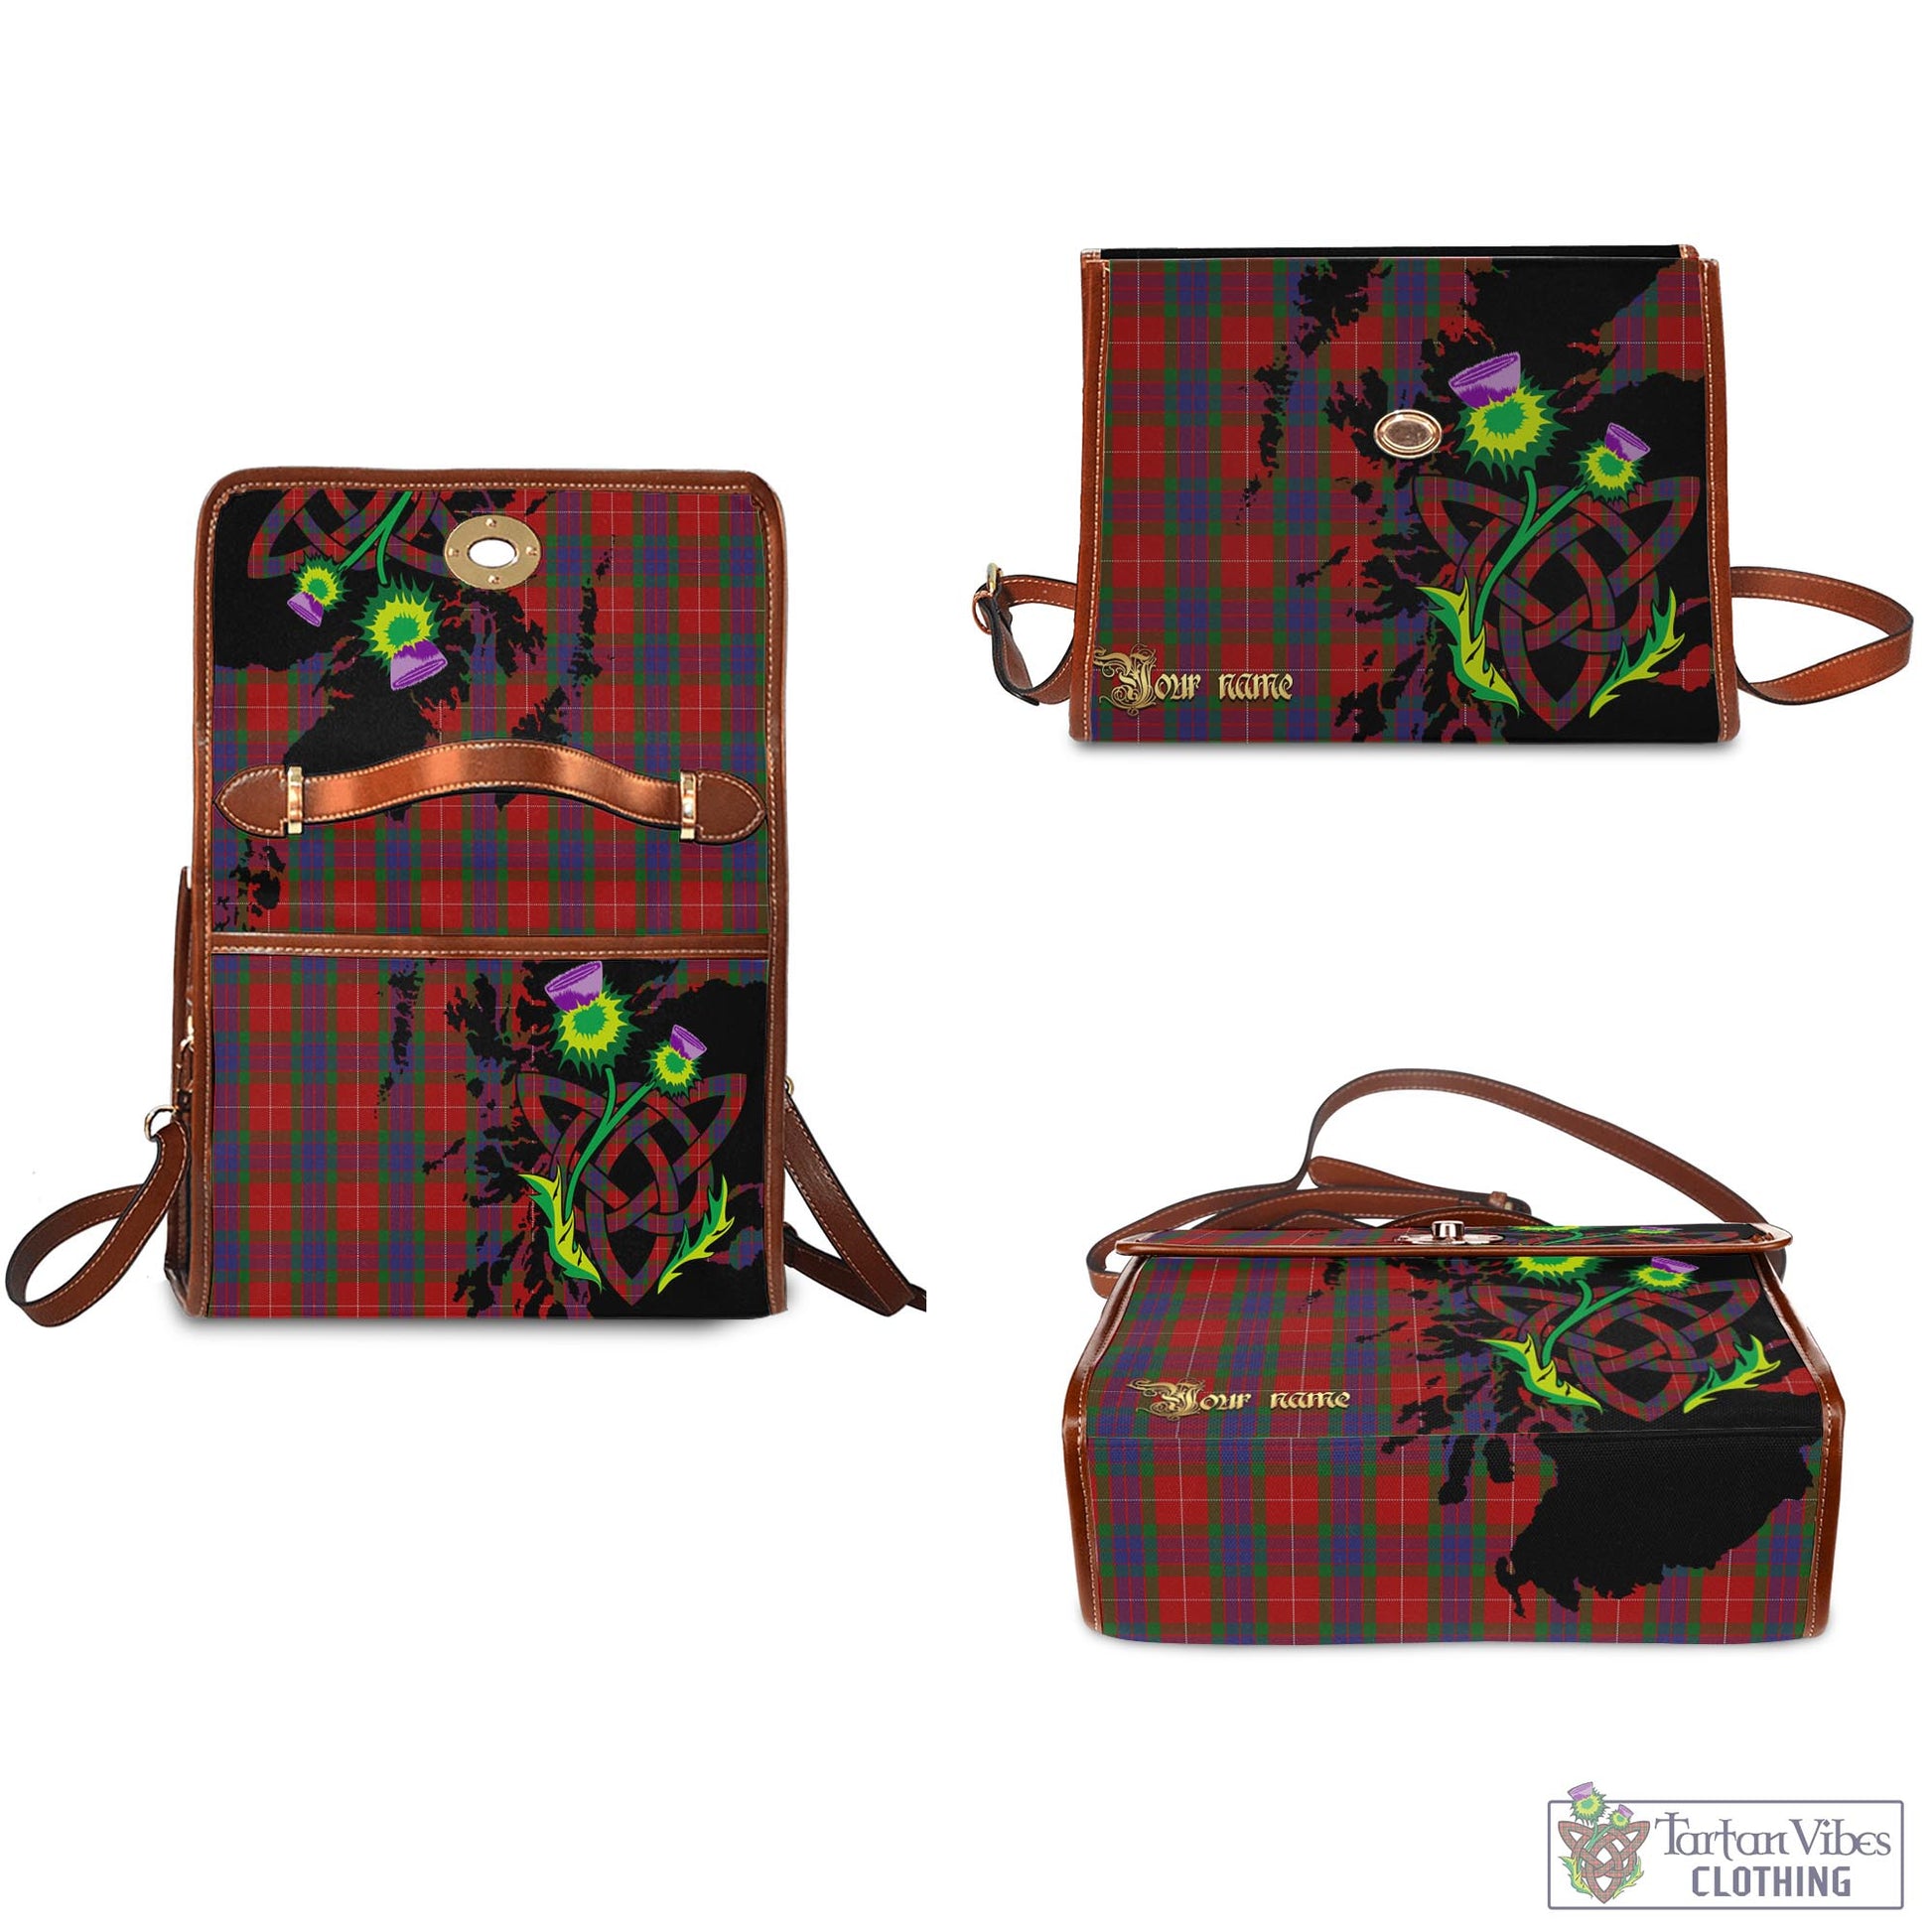 Tartan Vibes Clothing Fraser Tartan Waterproof Canvas Bag with Scotland Map and Thistle Celtic Accents